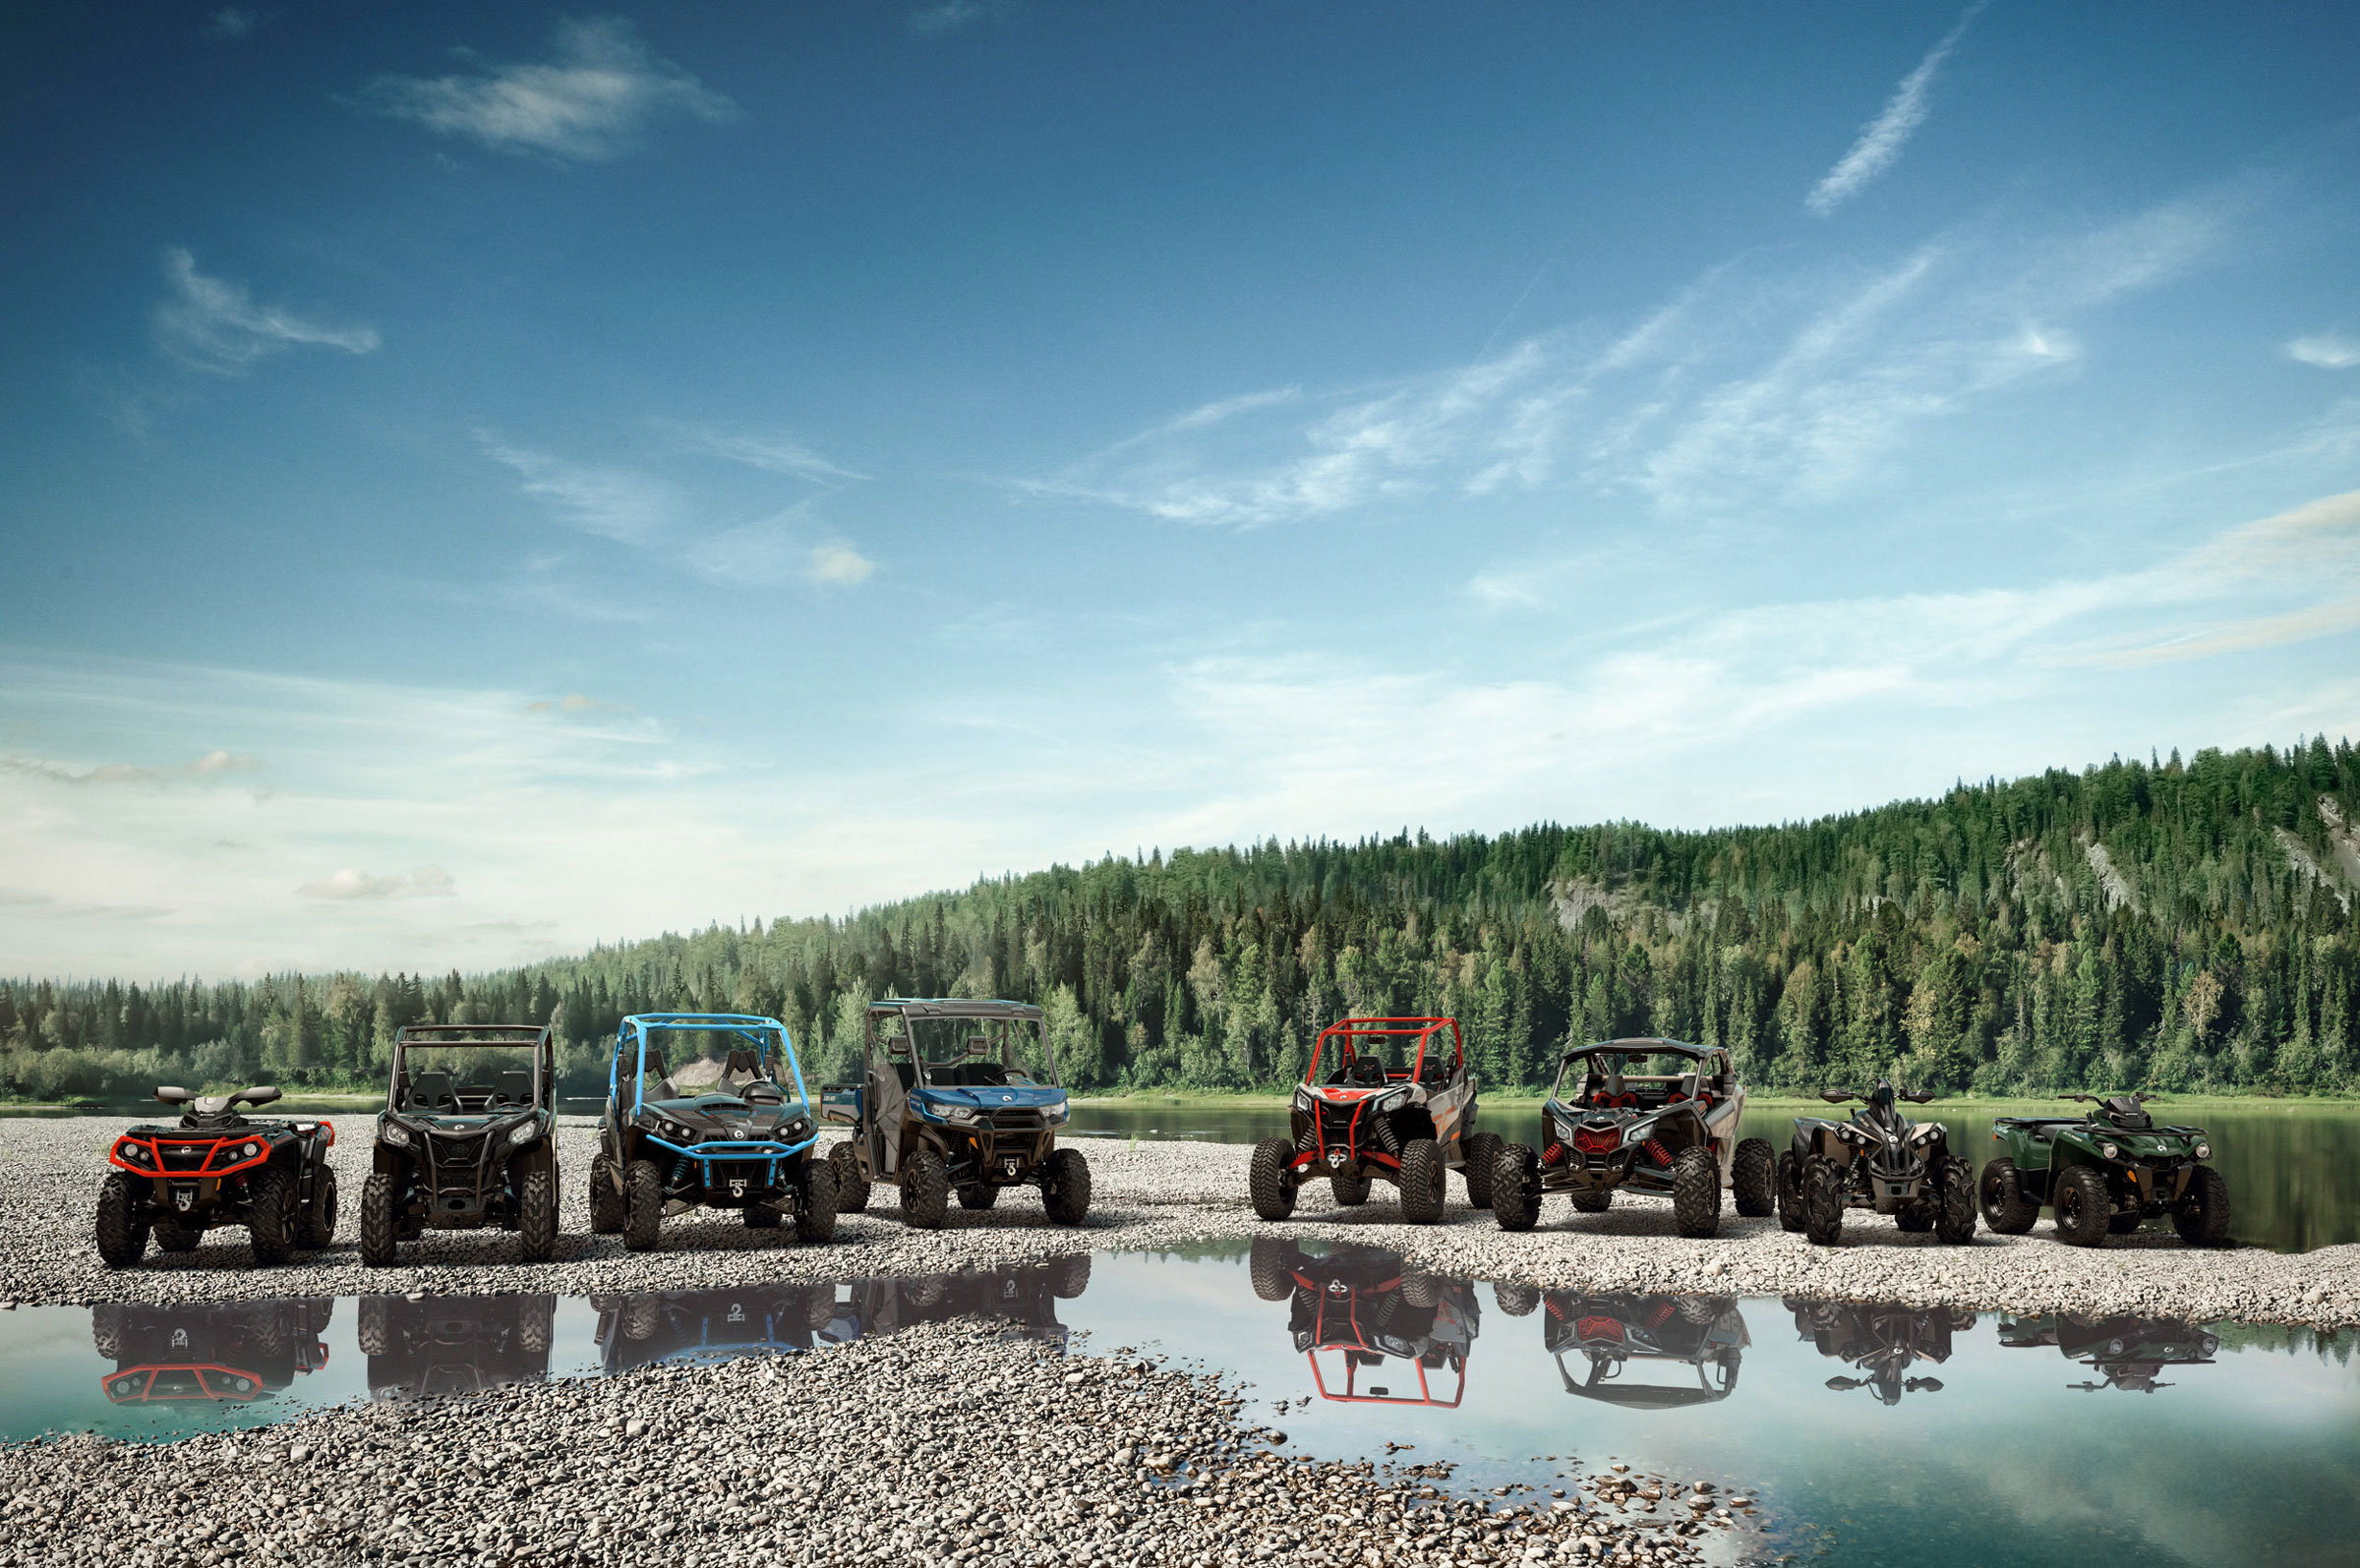 All Can-Am Off-Road ATV & Side-by-Side models near a lake